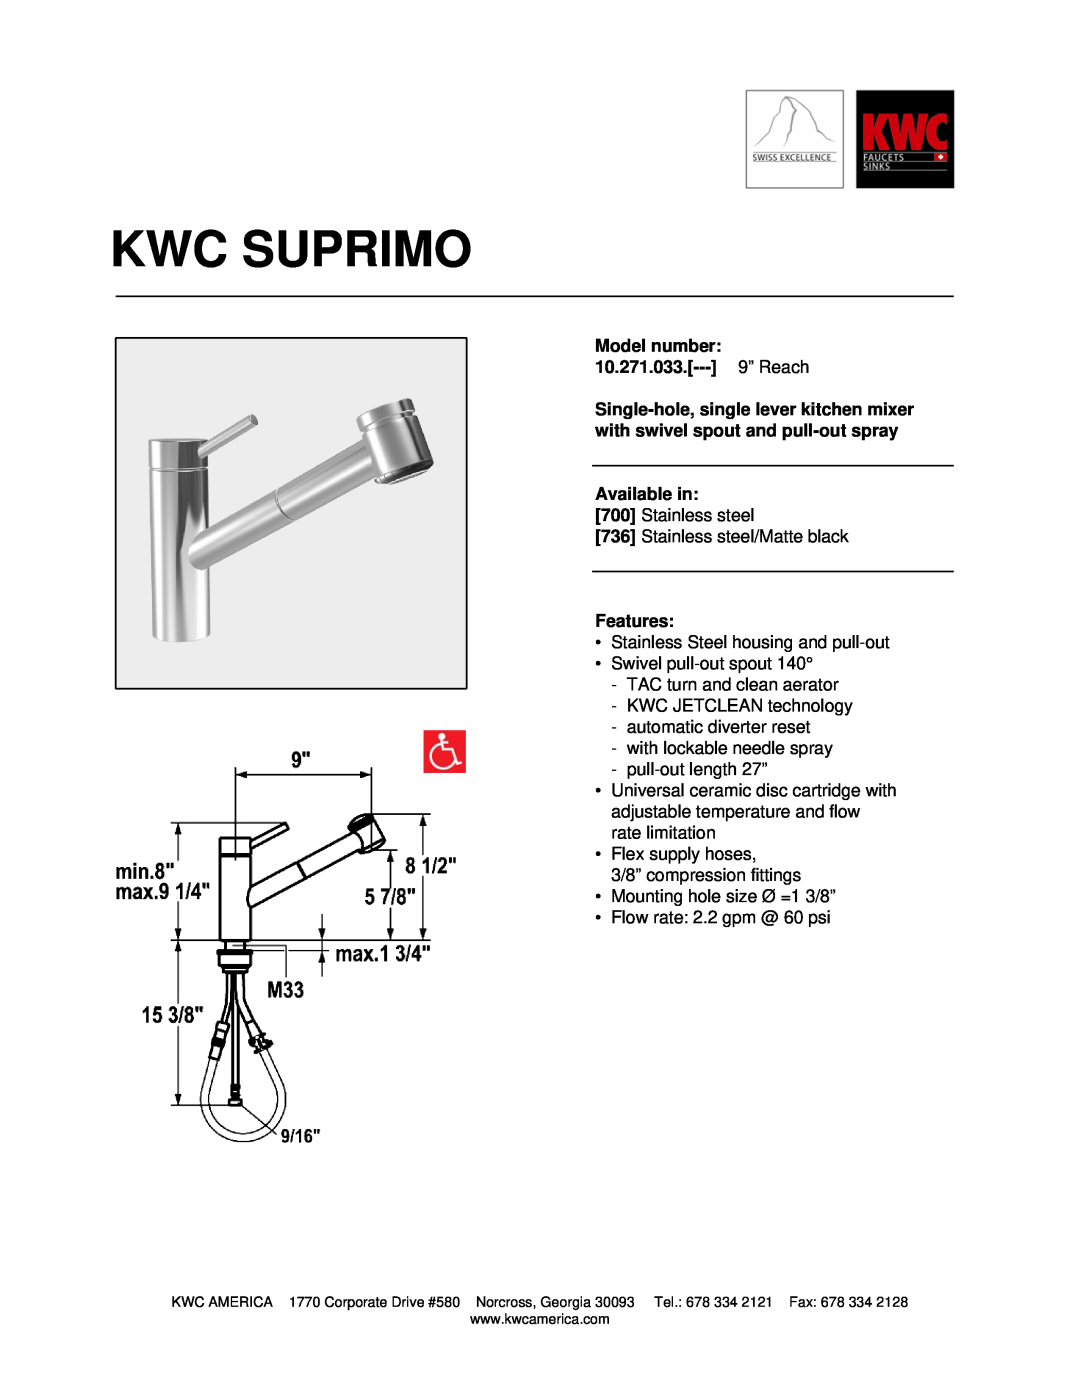 KWC manual Kwc Suprimo, Model number 10.271.033.--- 9” Reach, Available in, Features 